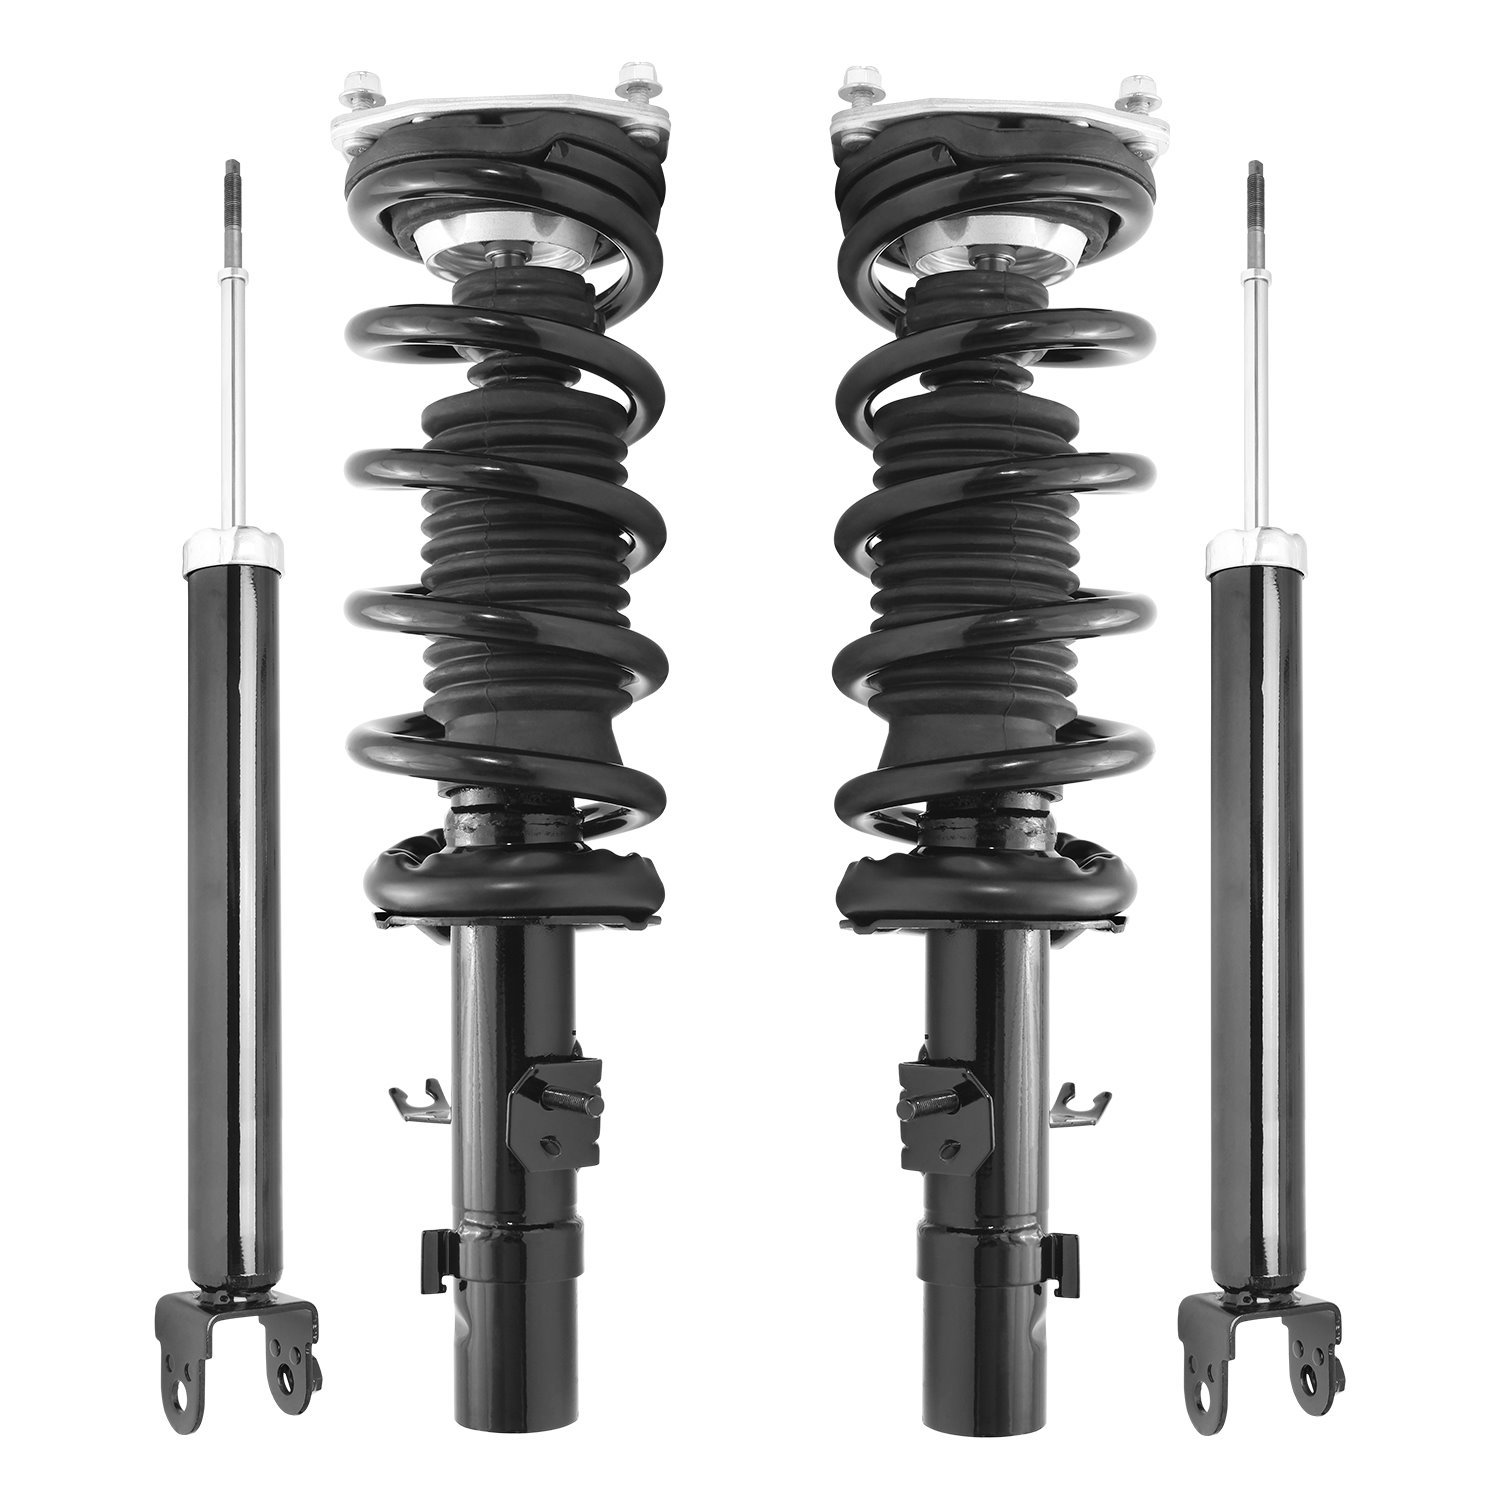 4-11415-255090-001 Front & Rear Suspension Strut & Coil Spring Assembly Fits Select Infiniti